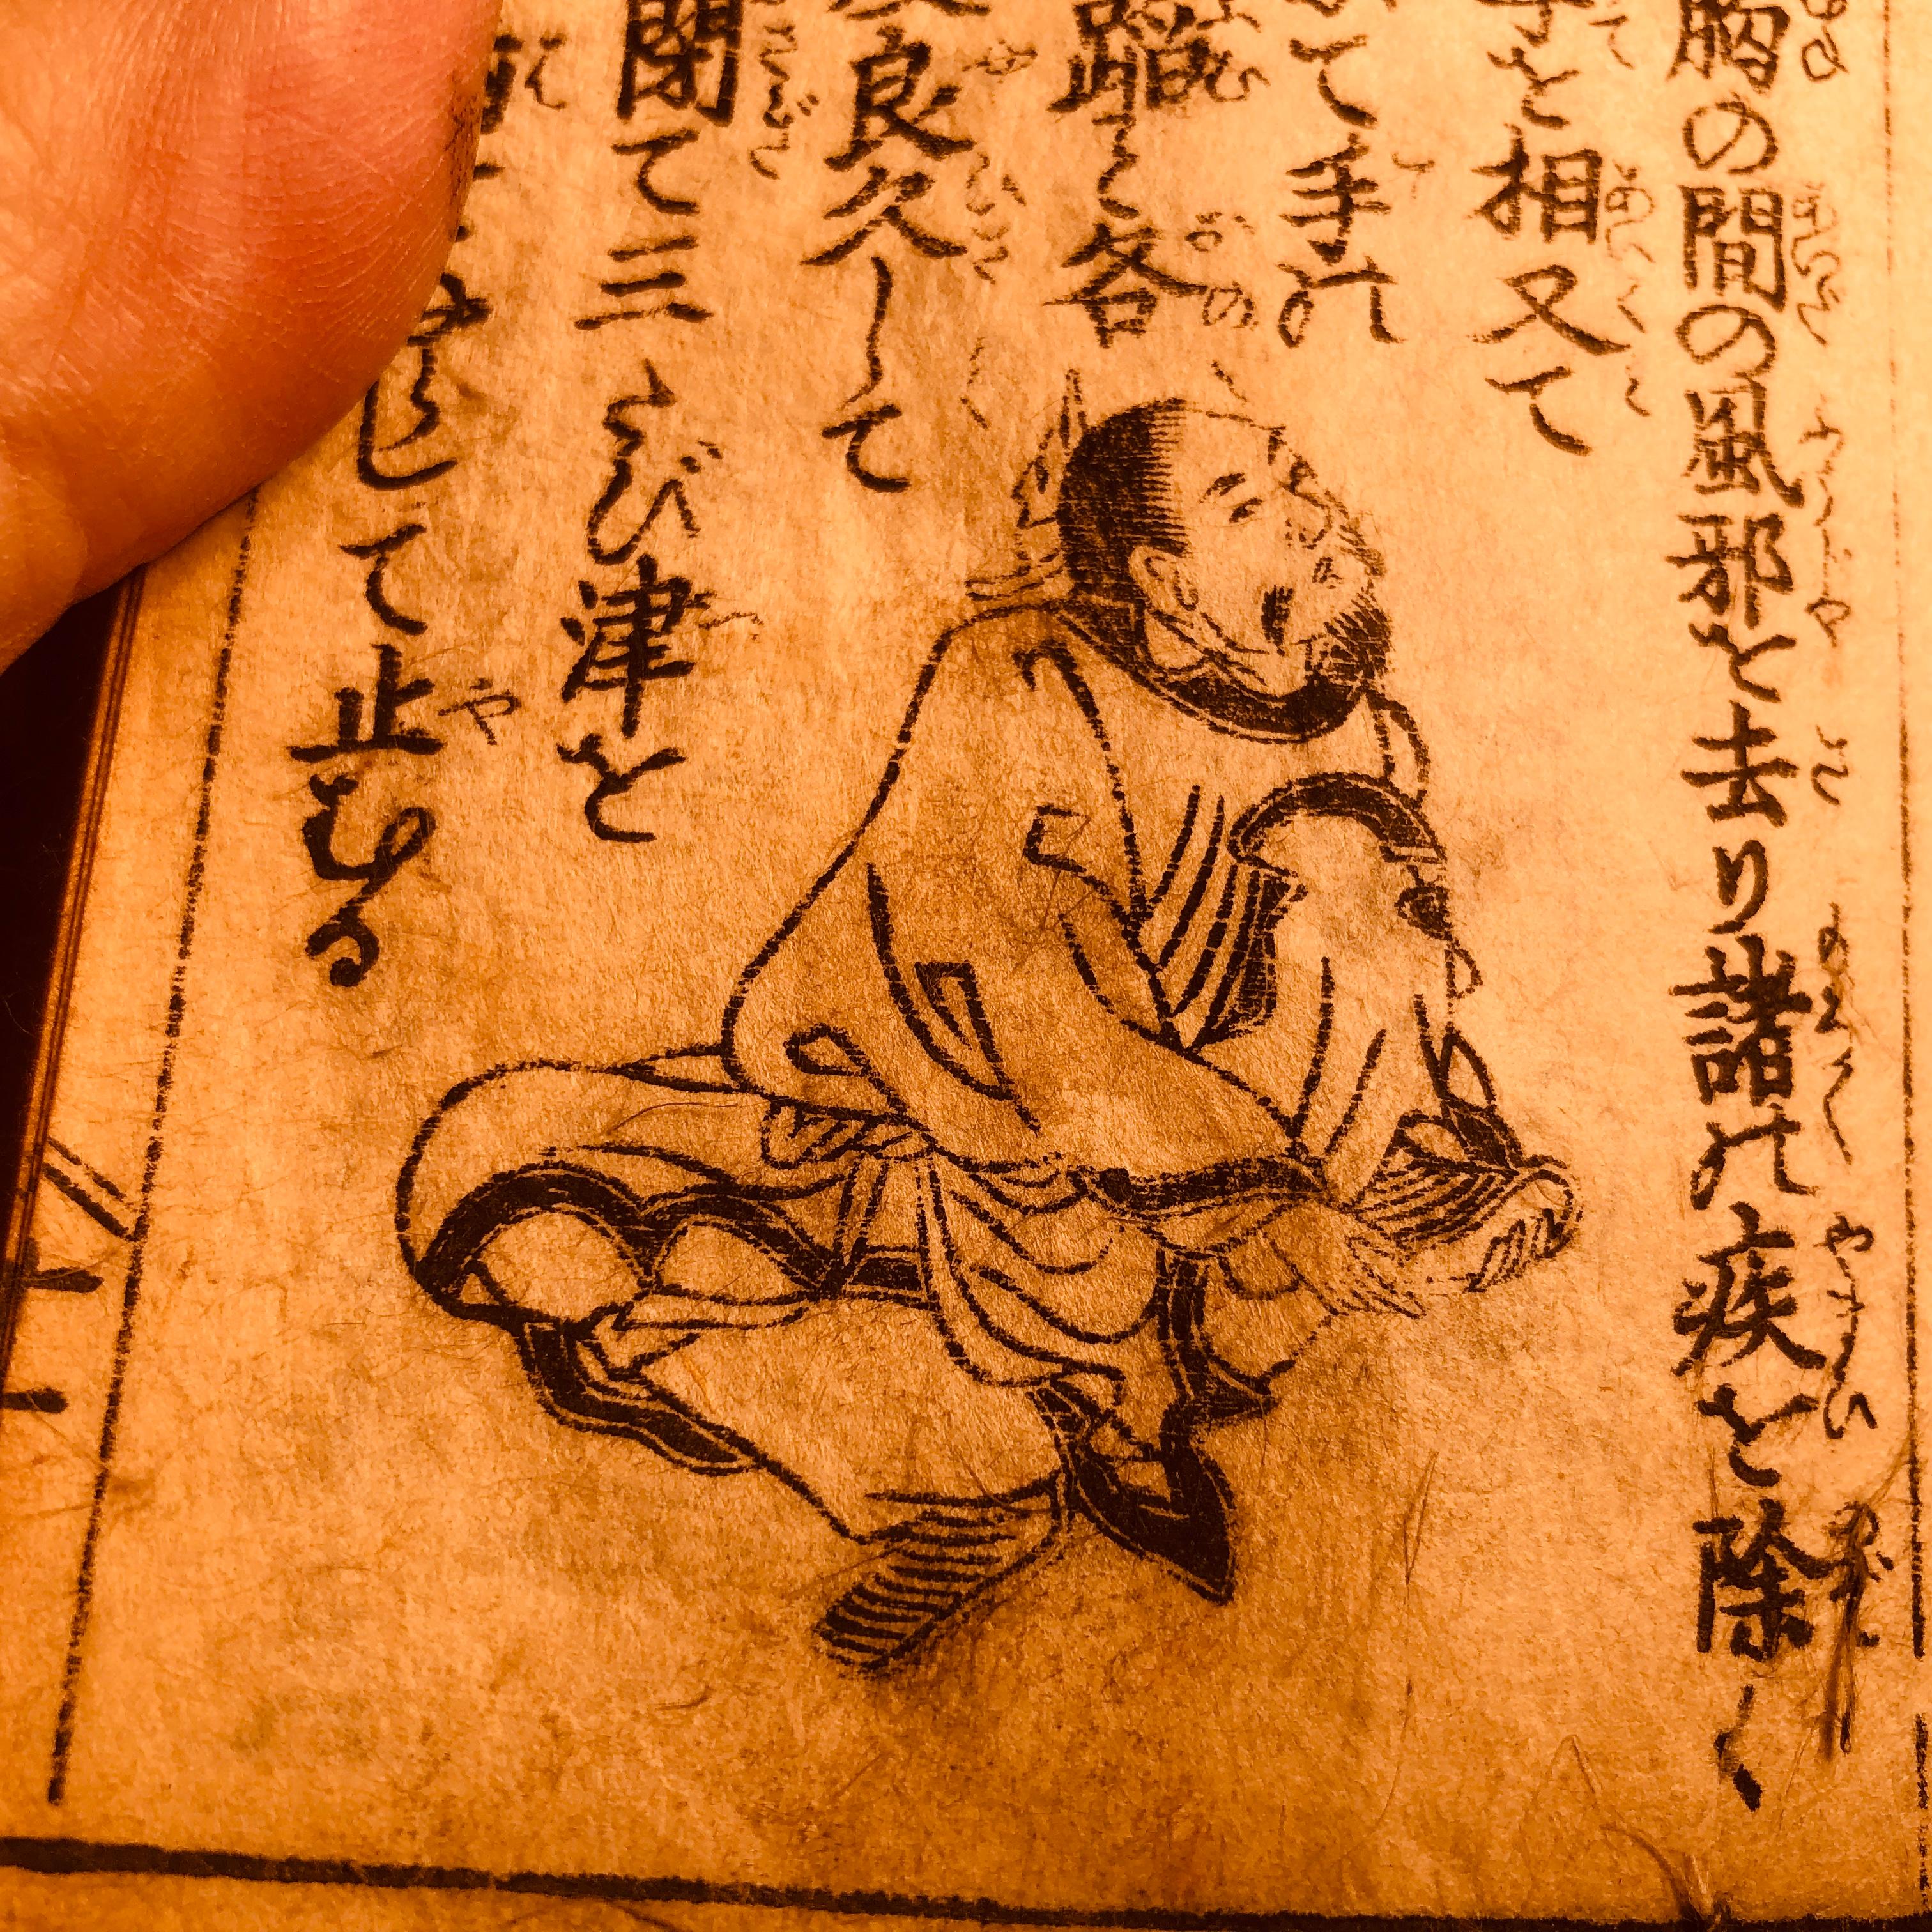 Important Chinese Acupuncture Antique Woodblock Hand Book, 19th Century Prints 7